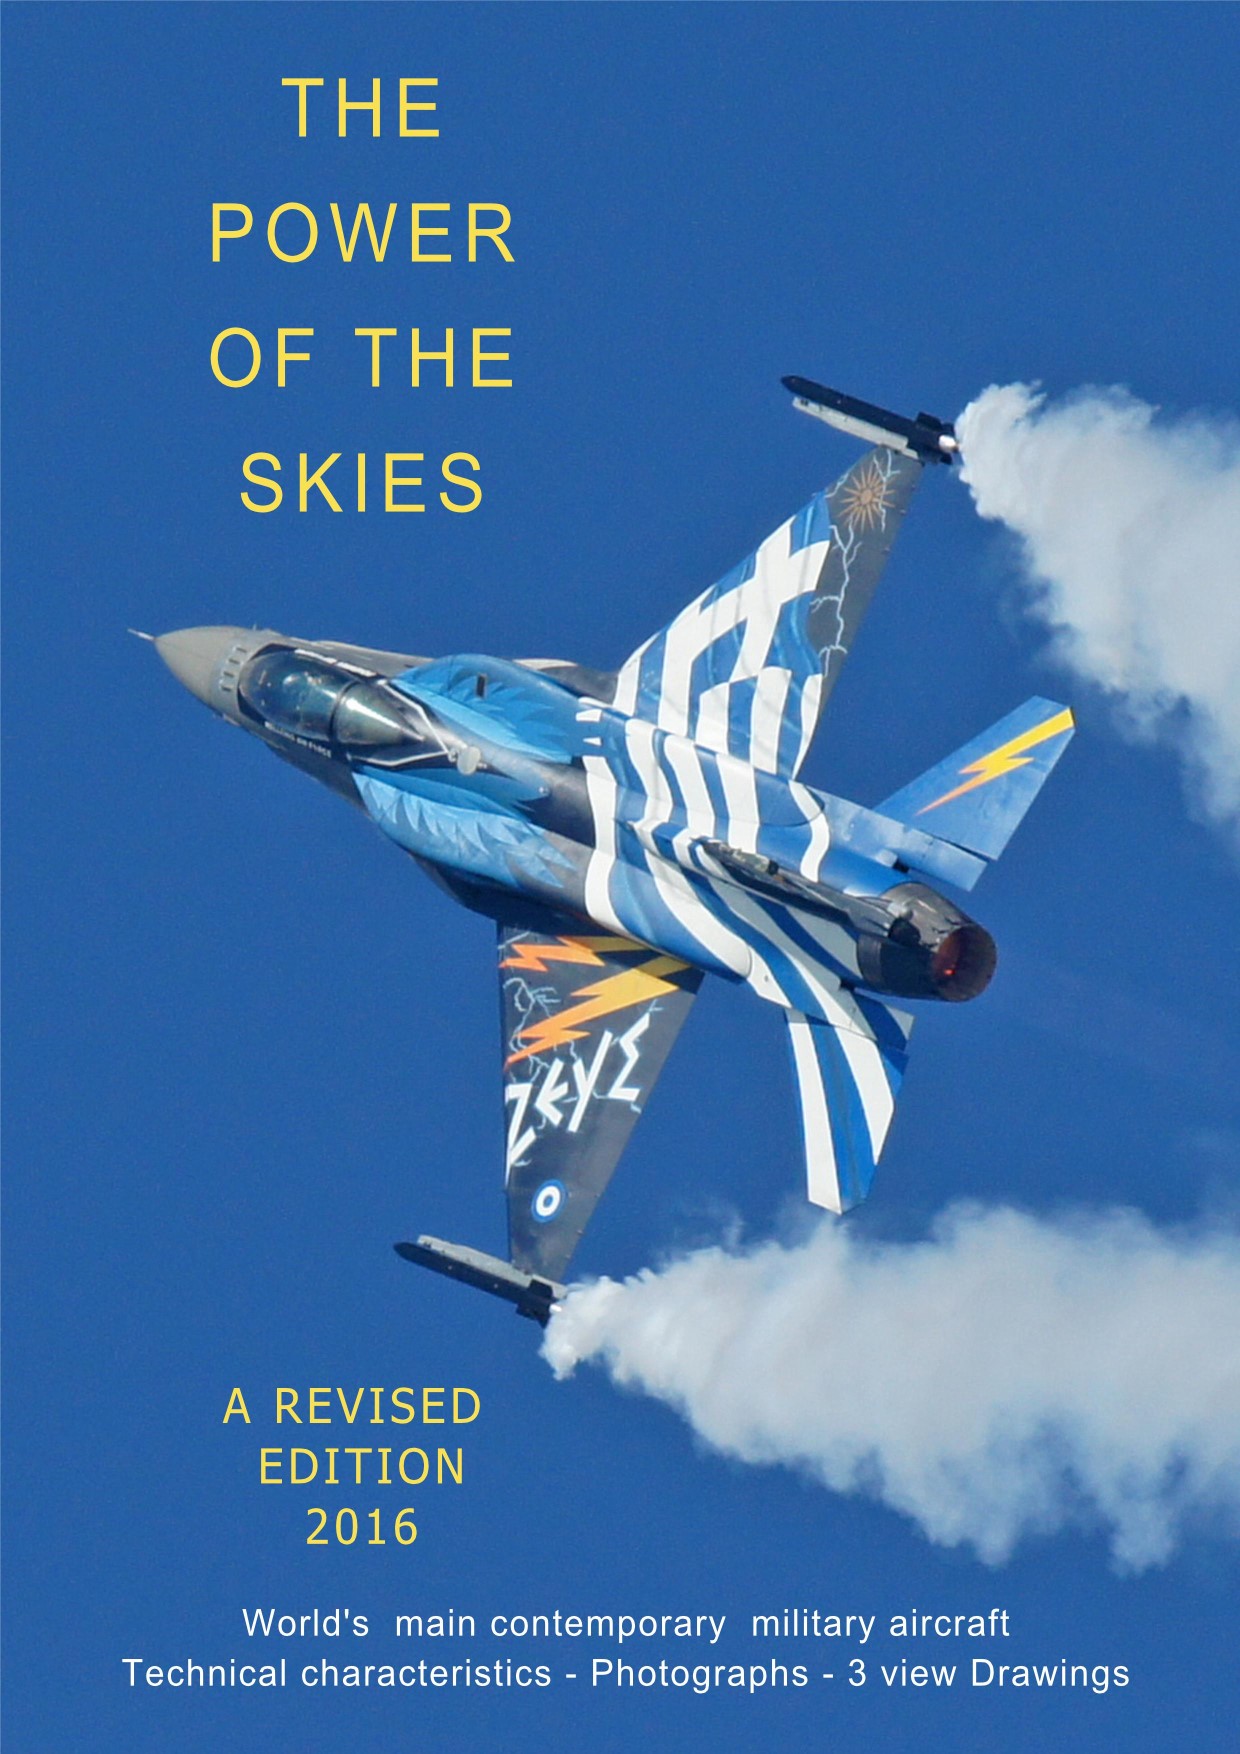 The power of the skies (World's main contemporary military aircraft)